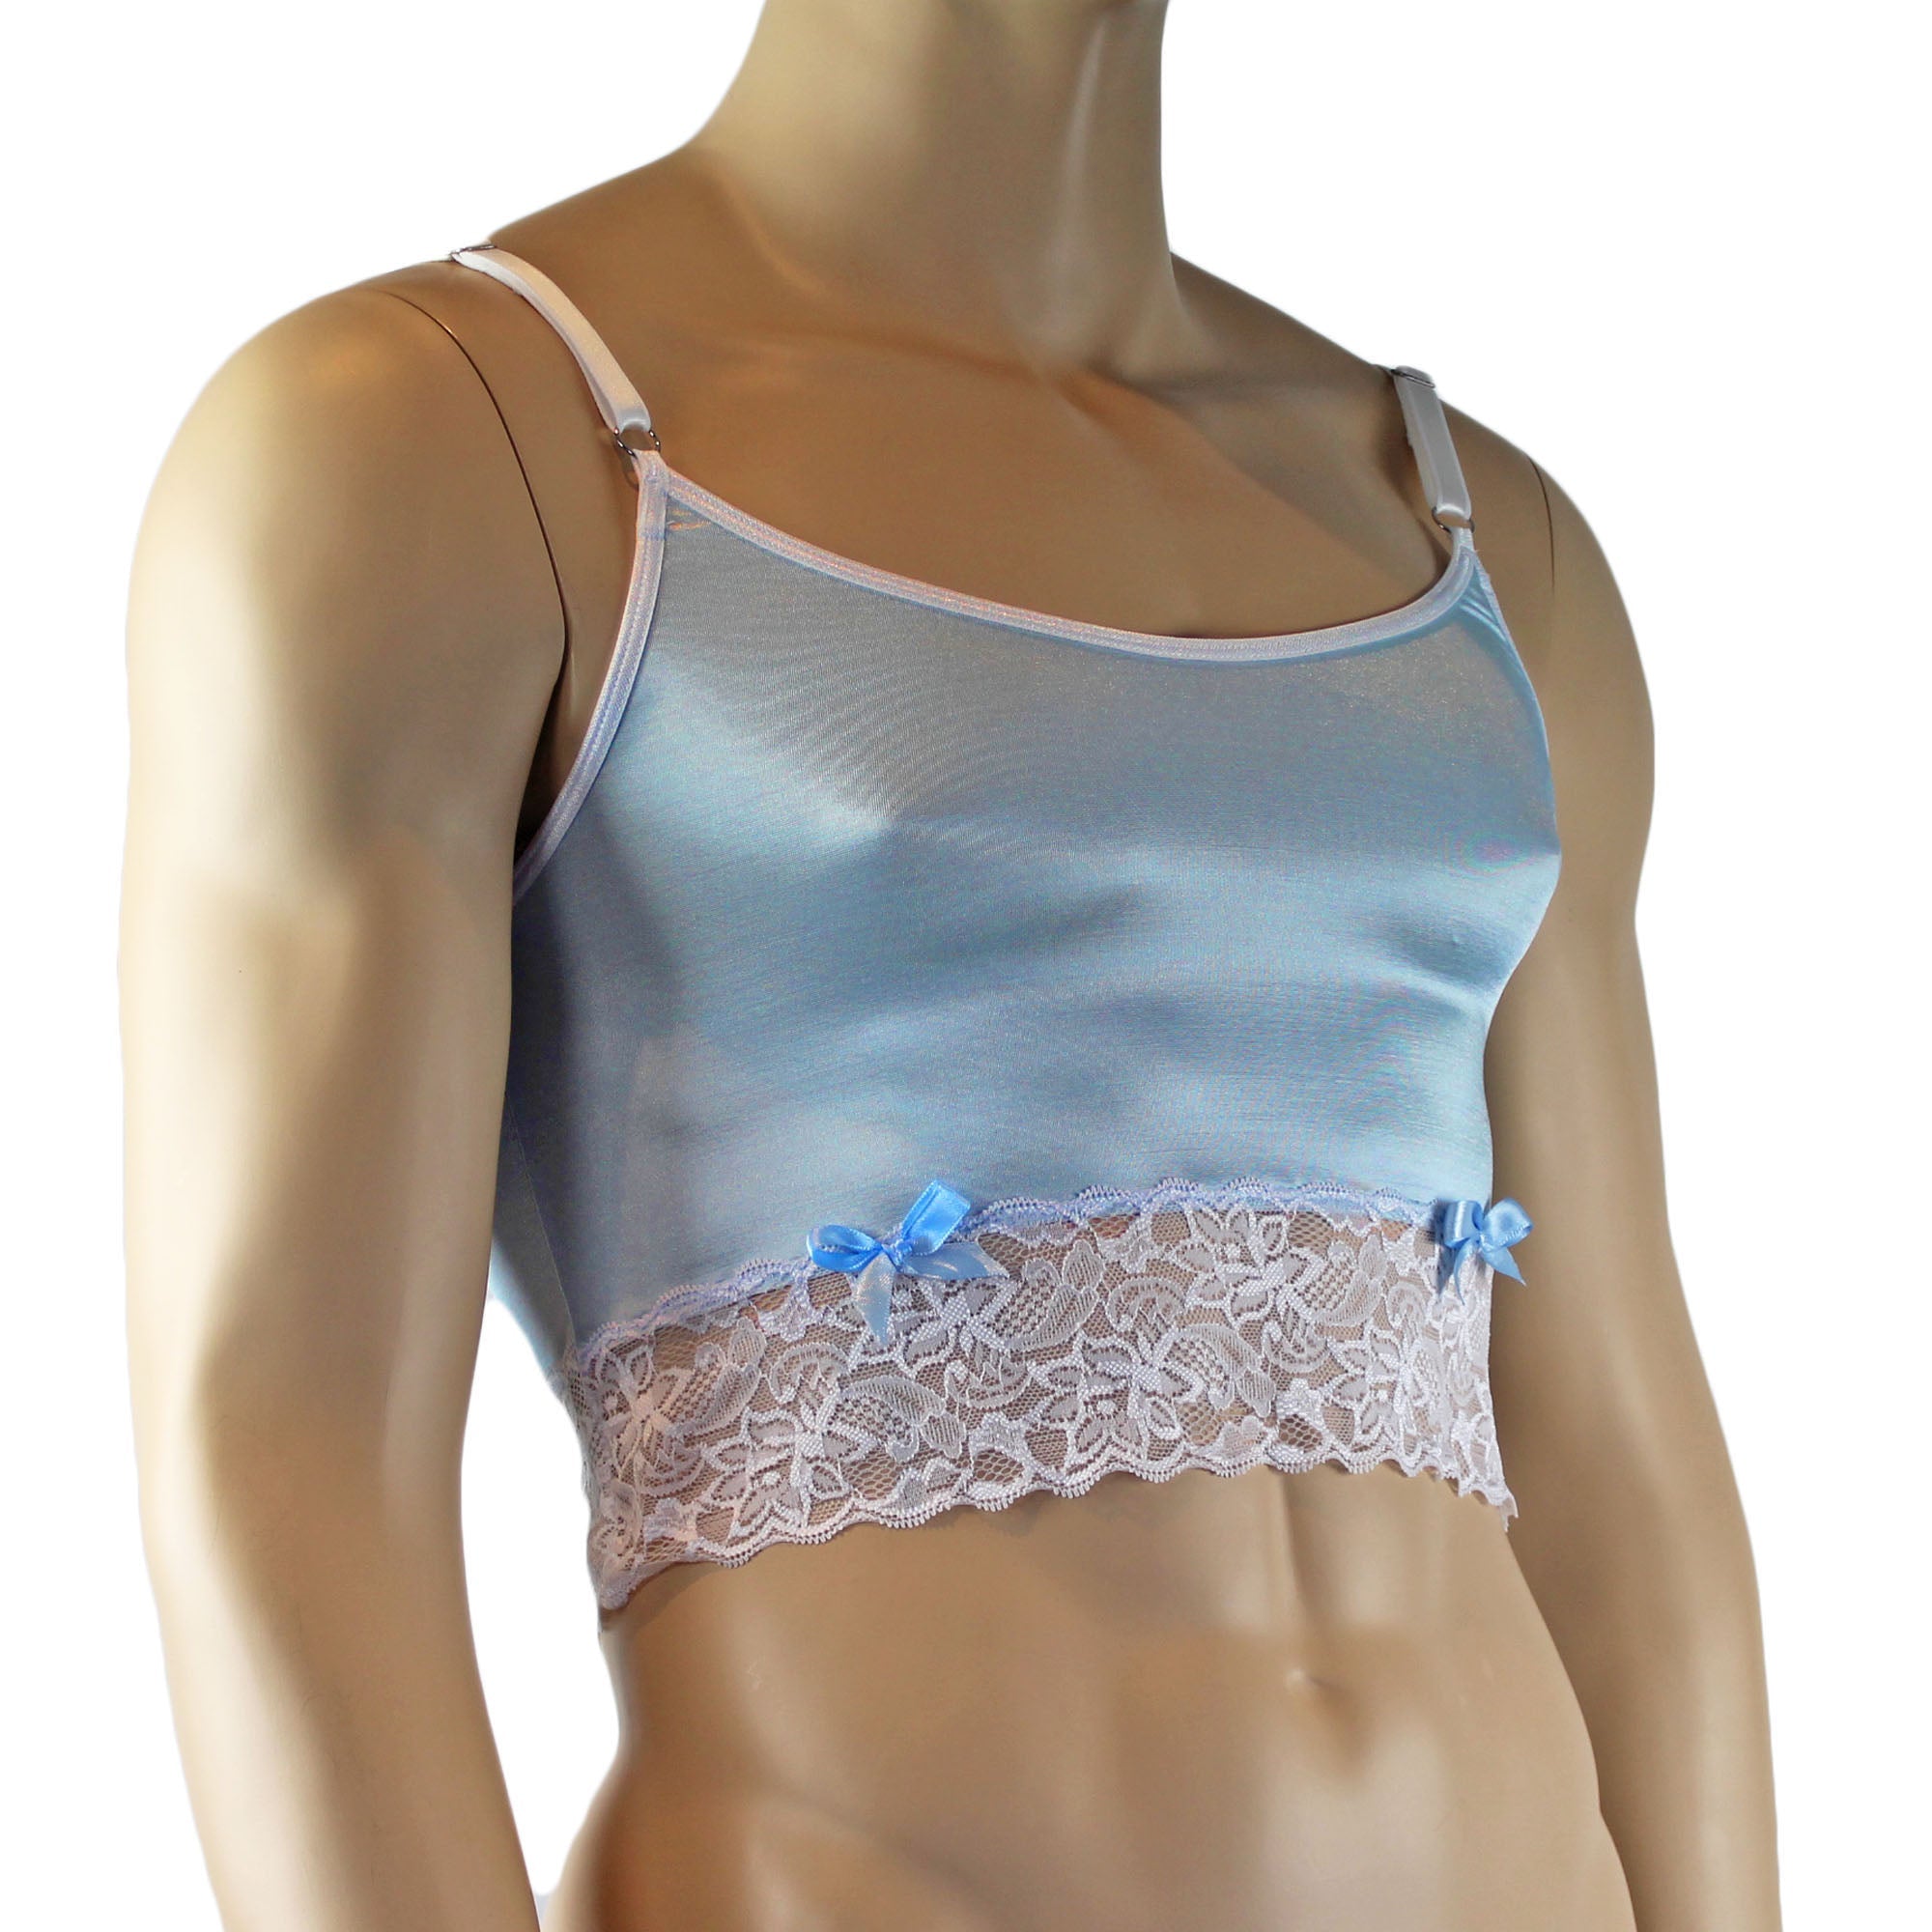 Mens Joanne Satin & Lace Crop Cami Top with Sexy Thong - Sizes up to 3XL Light Blue and White Lace